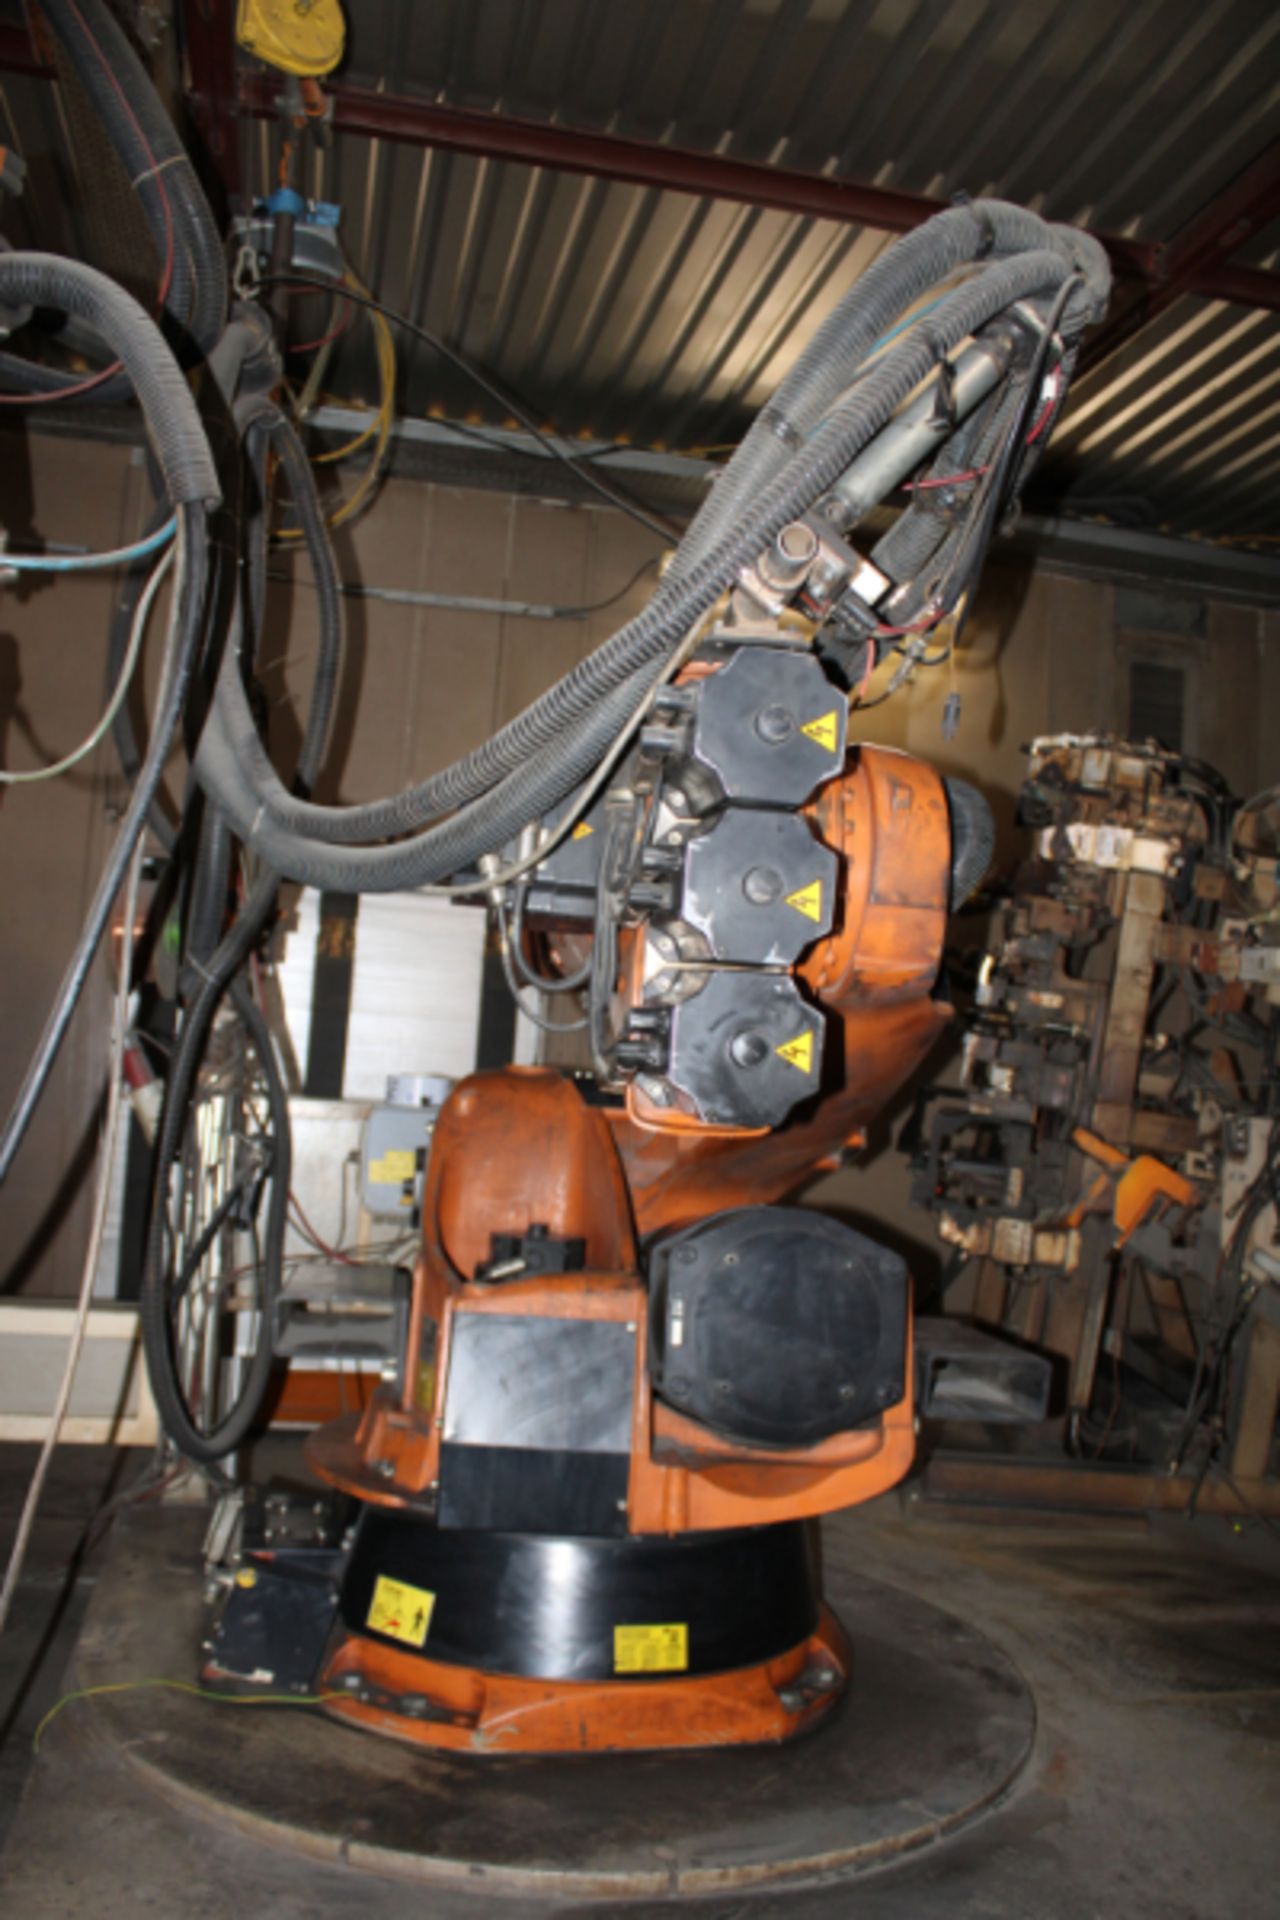 Kuka KR-150 Robot, Maximum Reach: 2,700 mm, Rated Payload: 150 Kg, with Robot Controller, New 2003 - Image 2 of 11